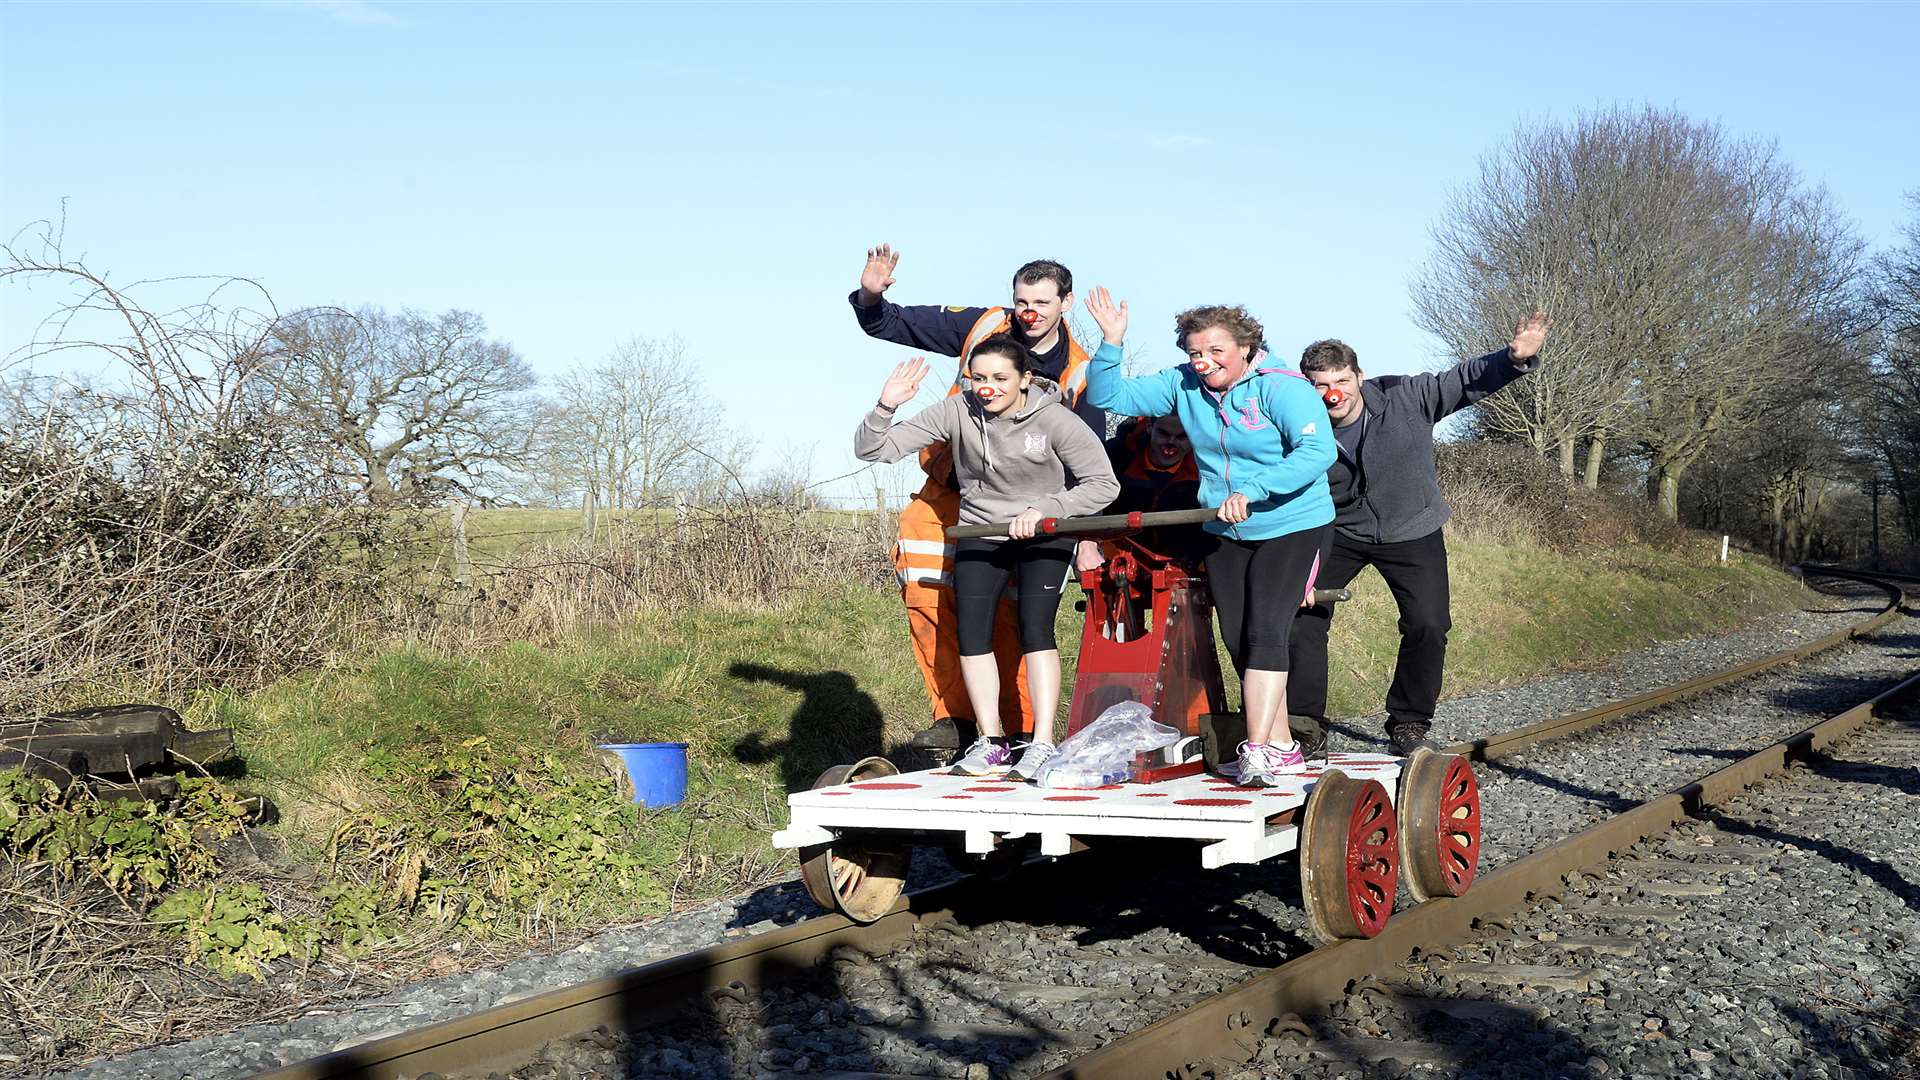 Only 99 more miles to go. A trial run for the Kent & East Sussex Railway staff and volunteers who are undertaking a 100-mile pump trolley challenge